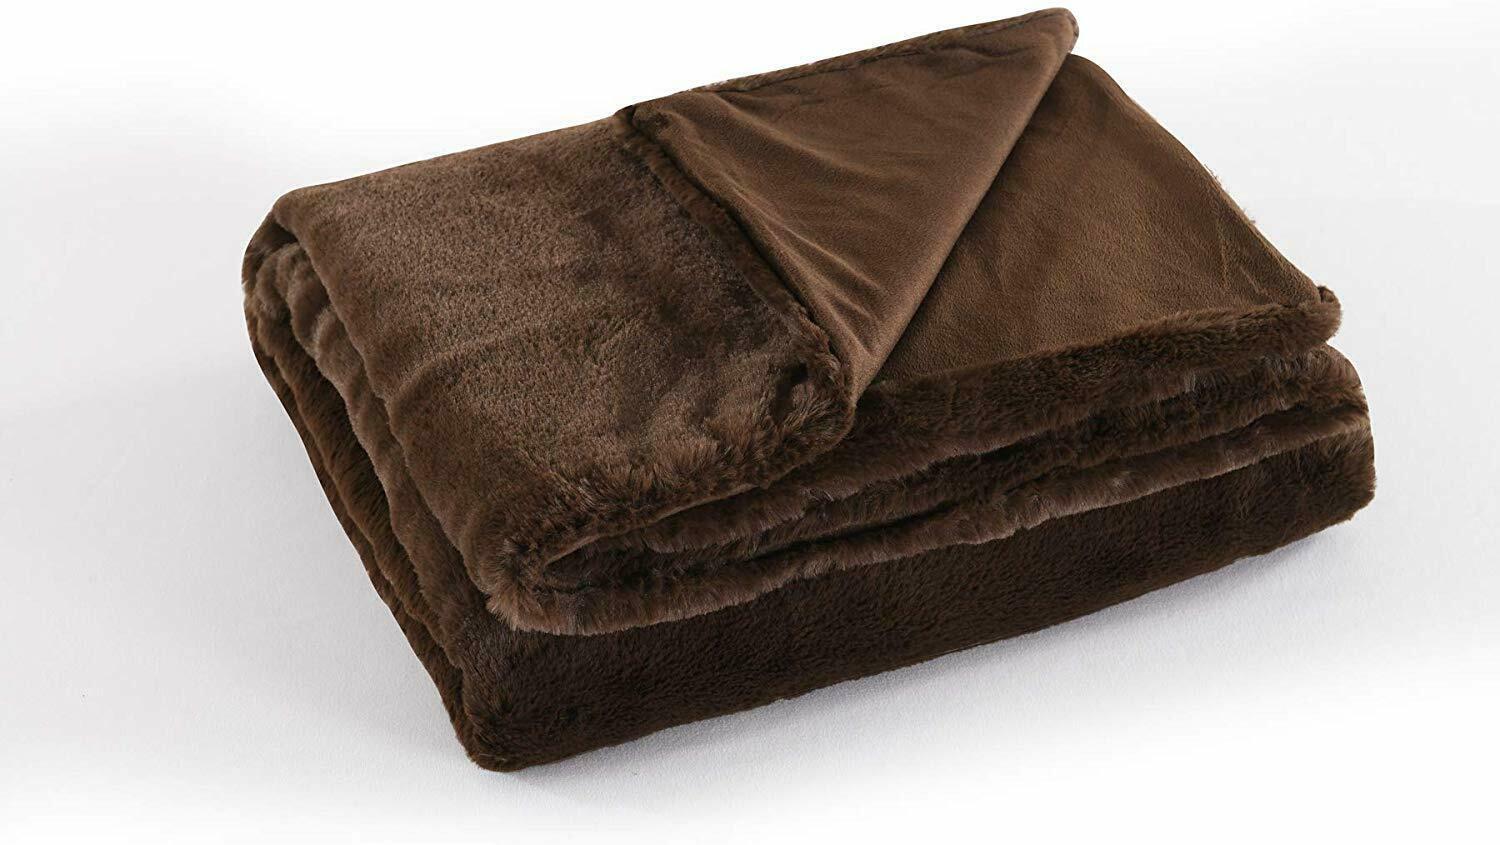 Faux Fur Throw Blanket Throw 50 by 60 inches